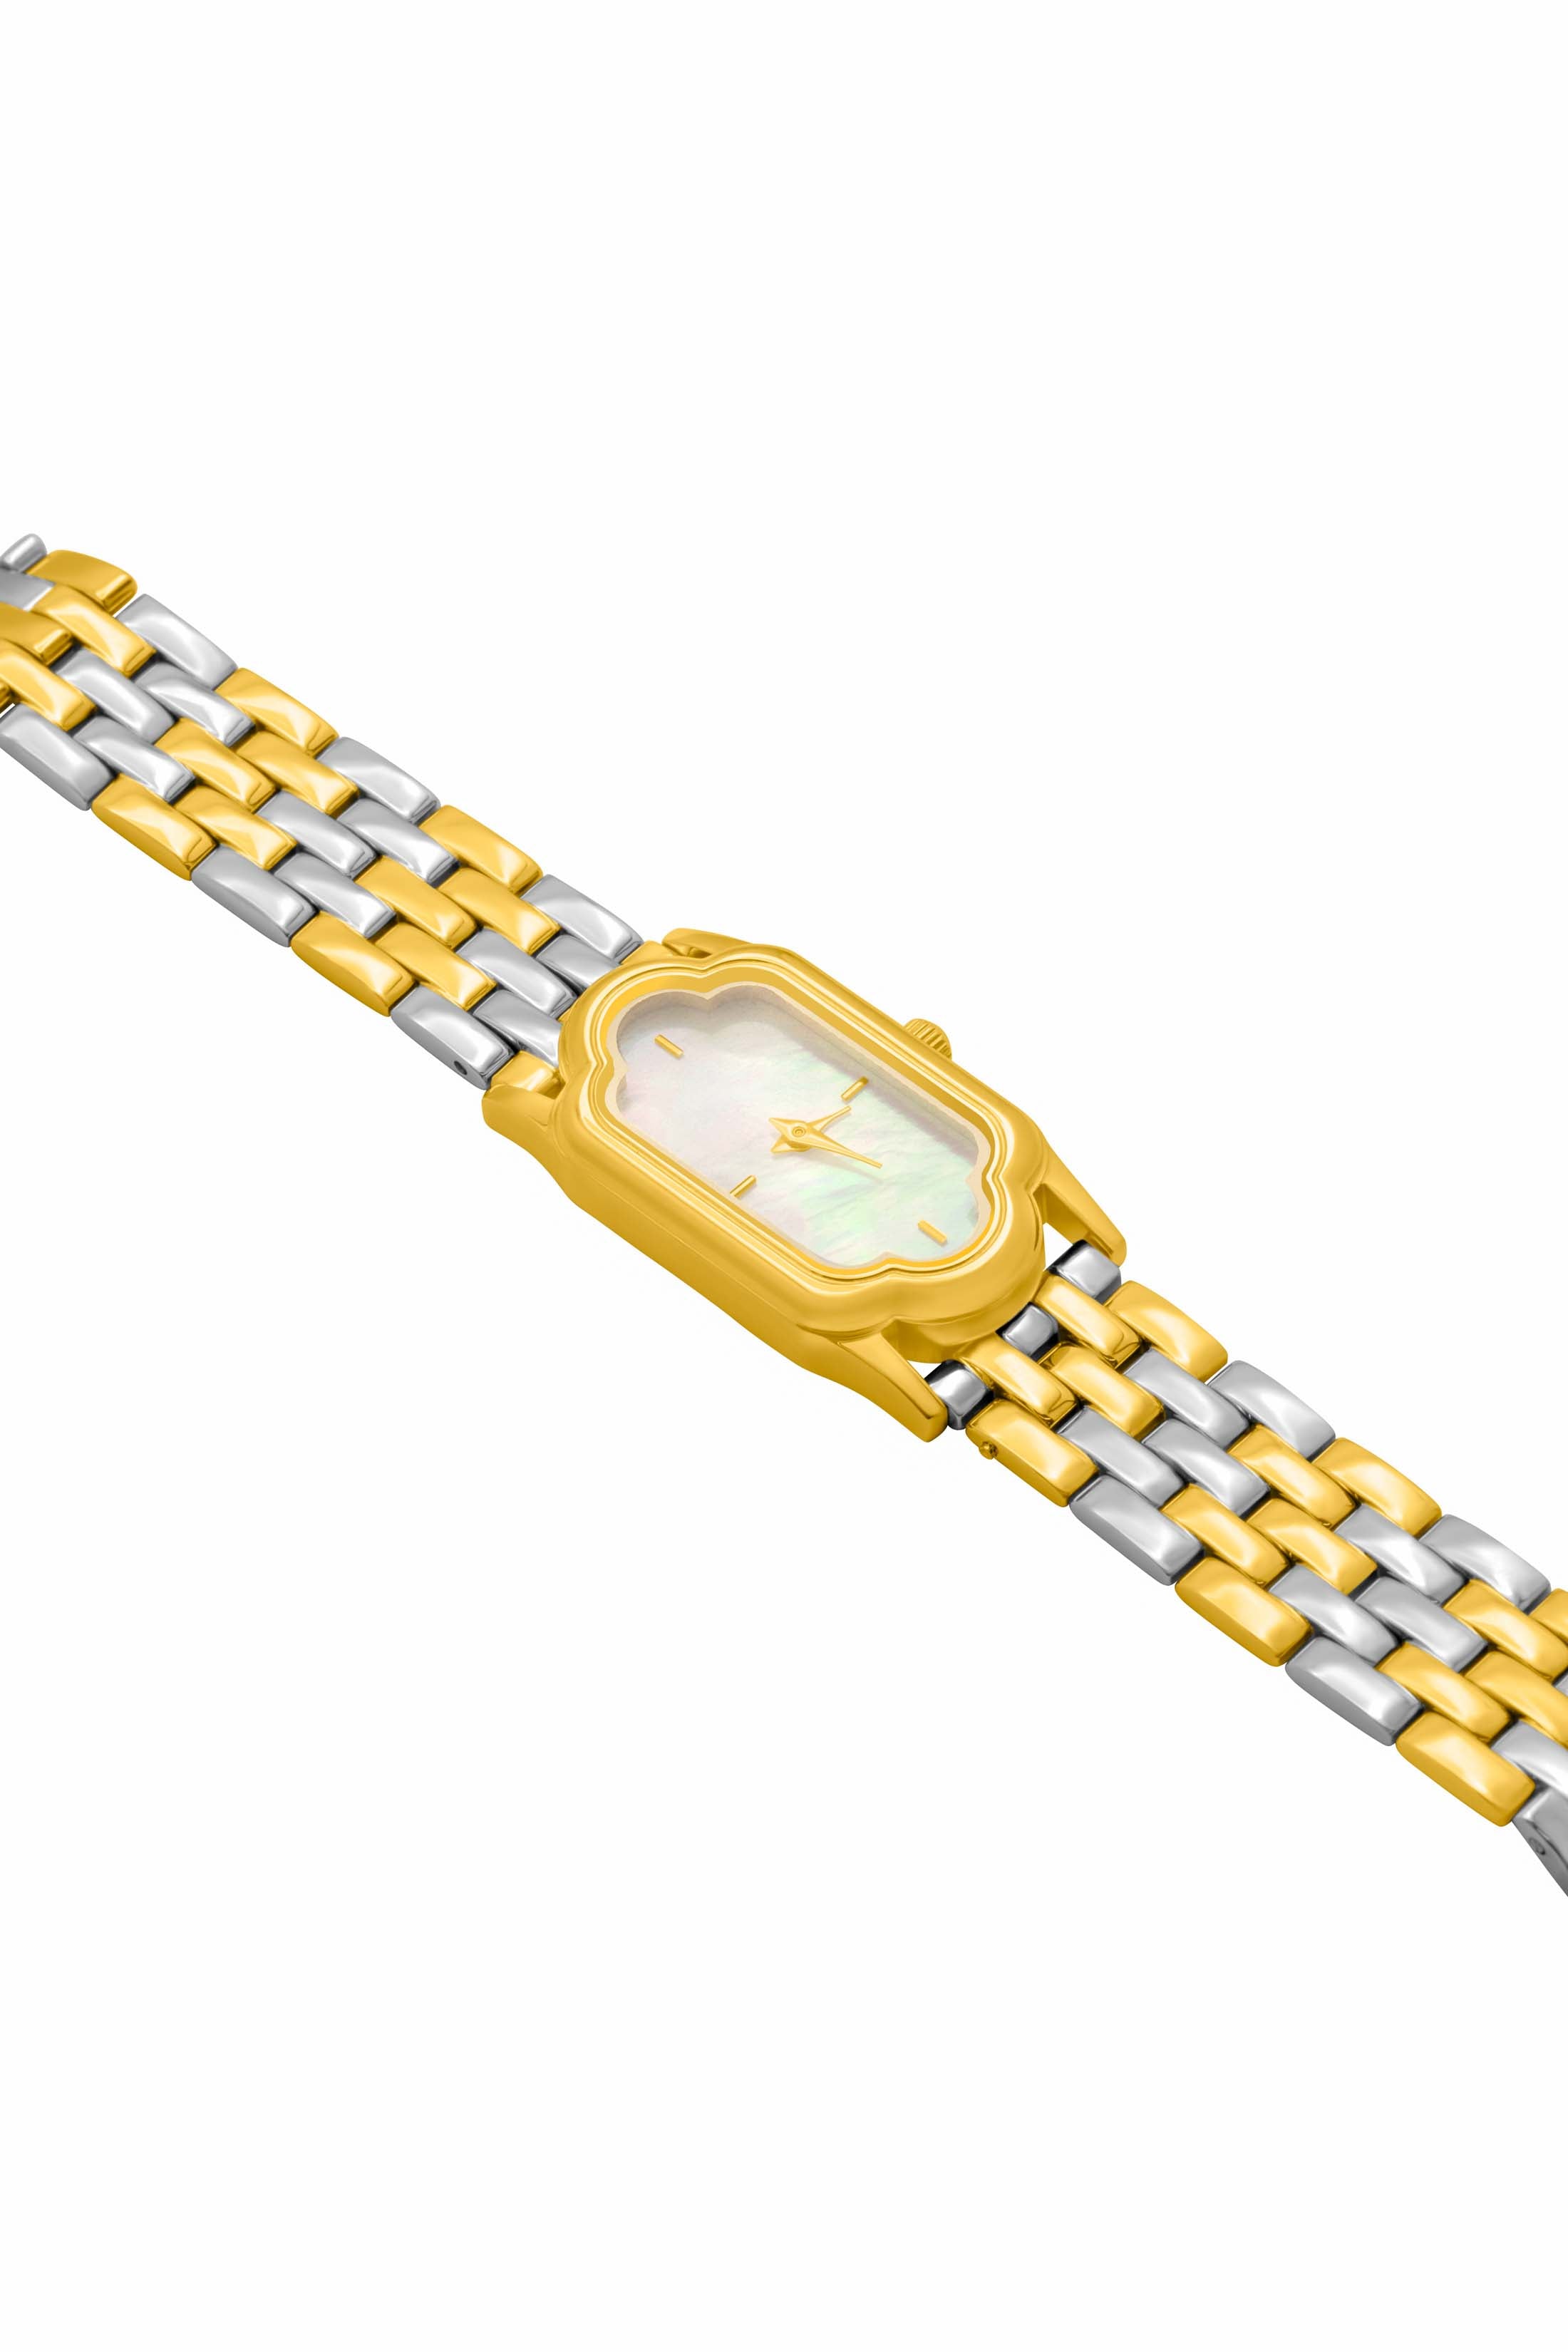 Carisma&#39;s Oblong Ivory Mother of Pearl Watch